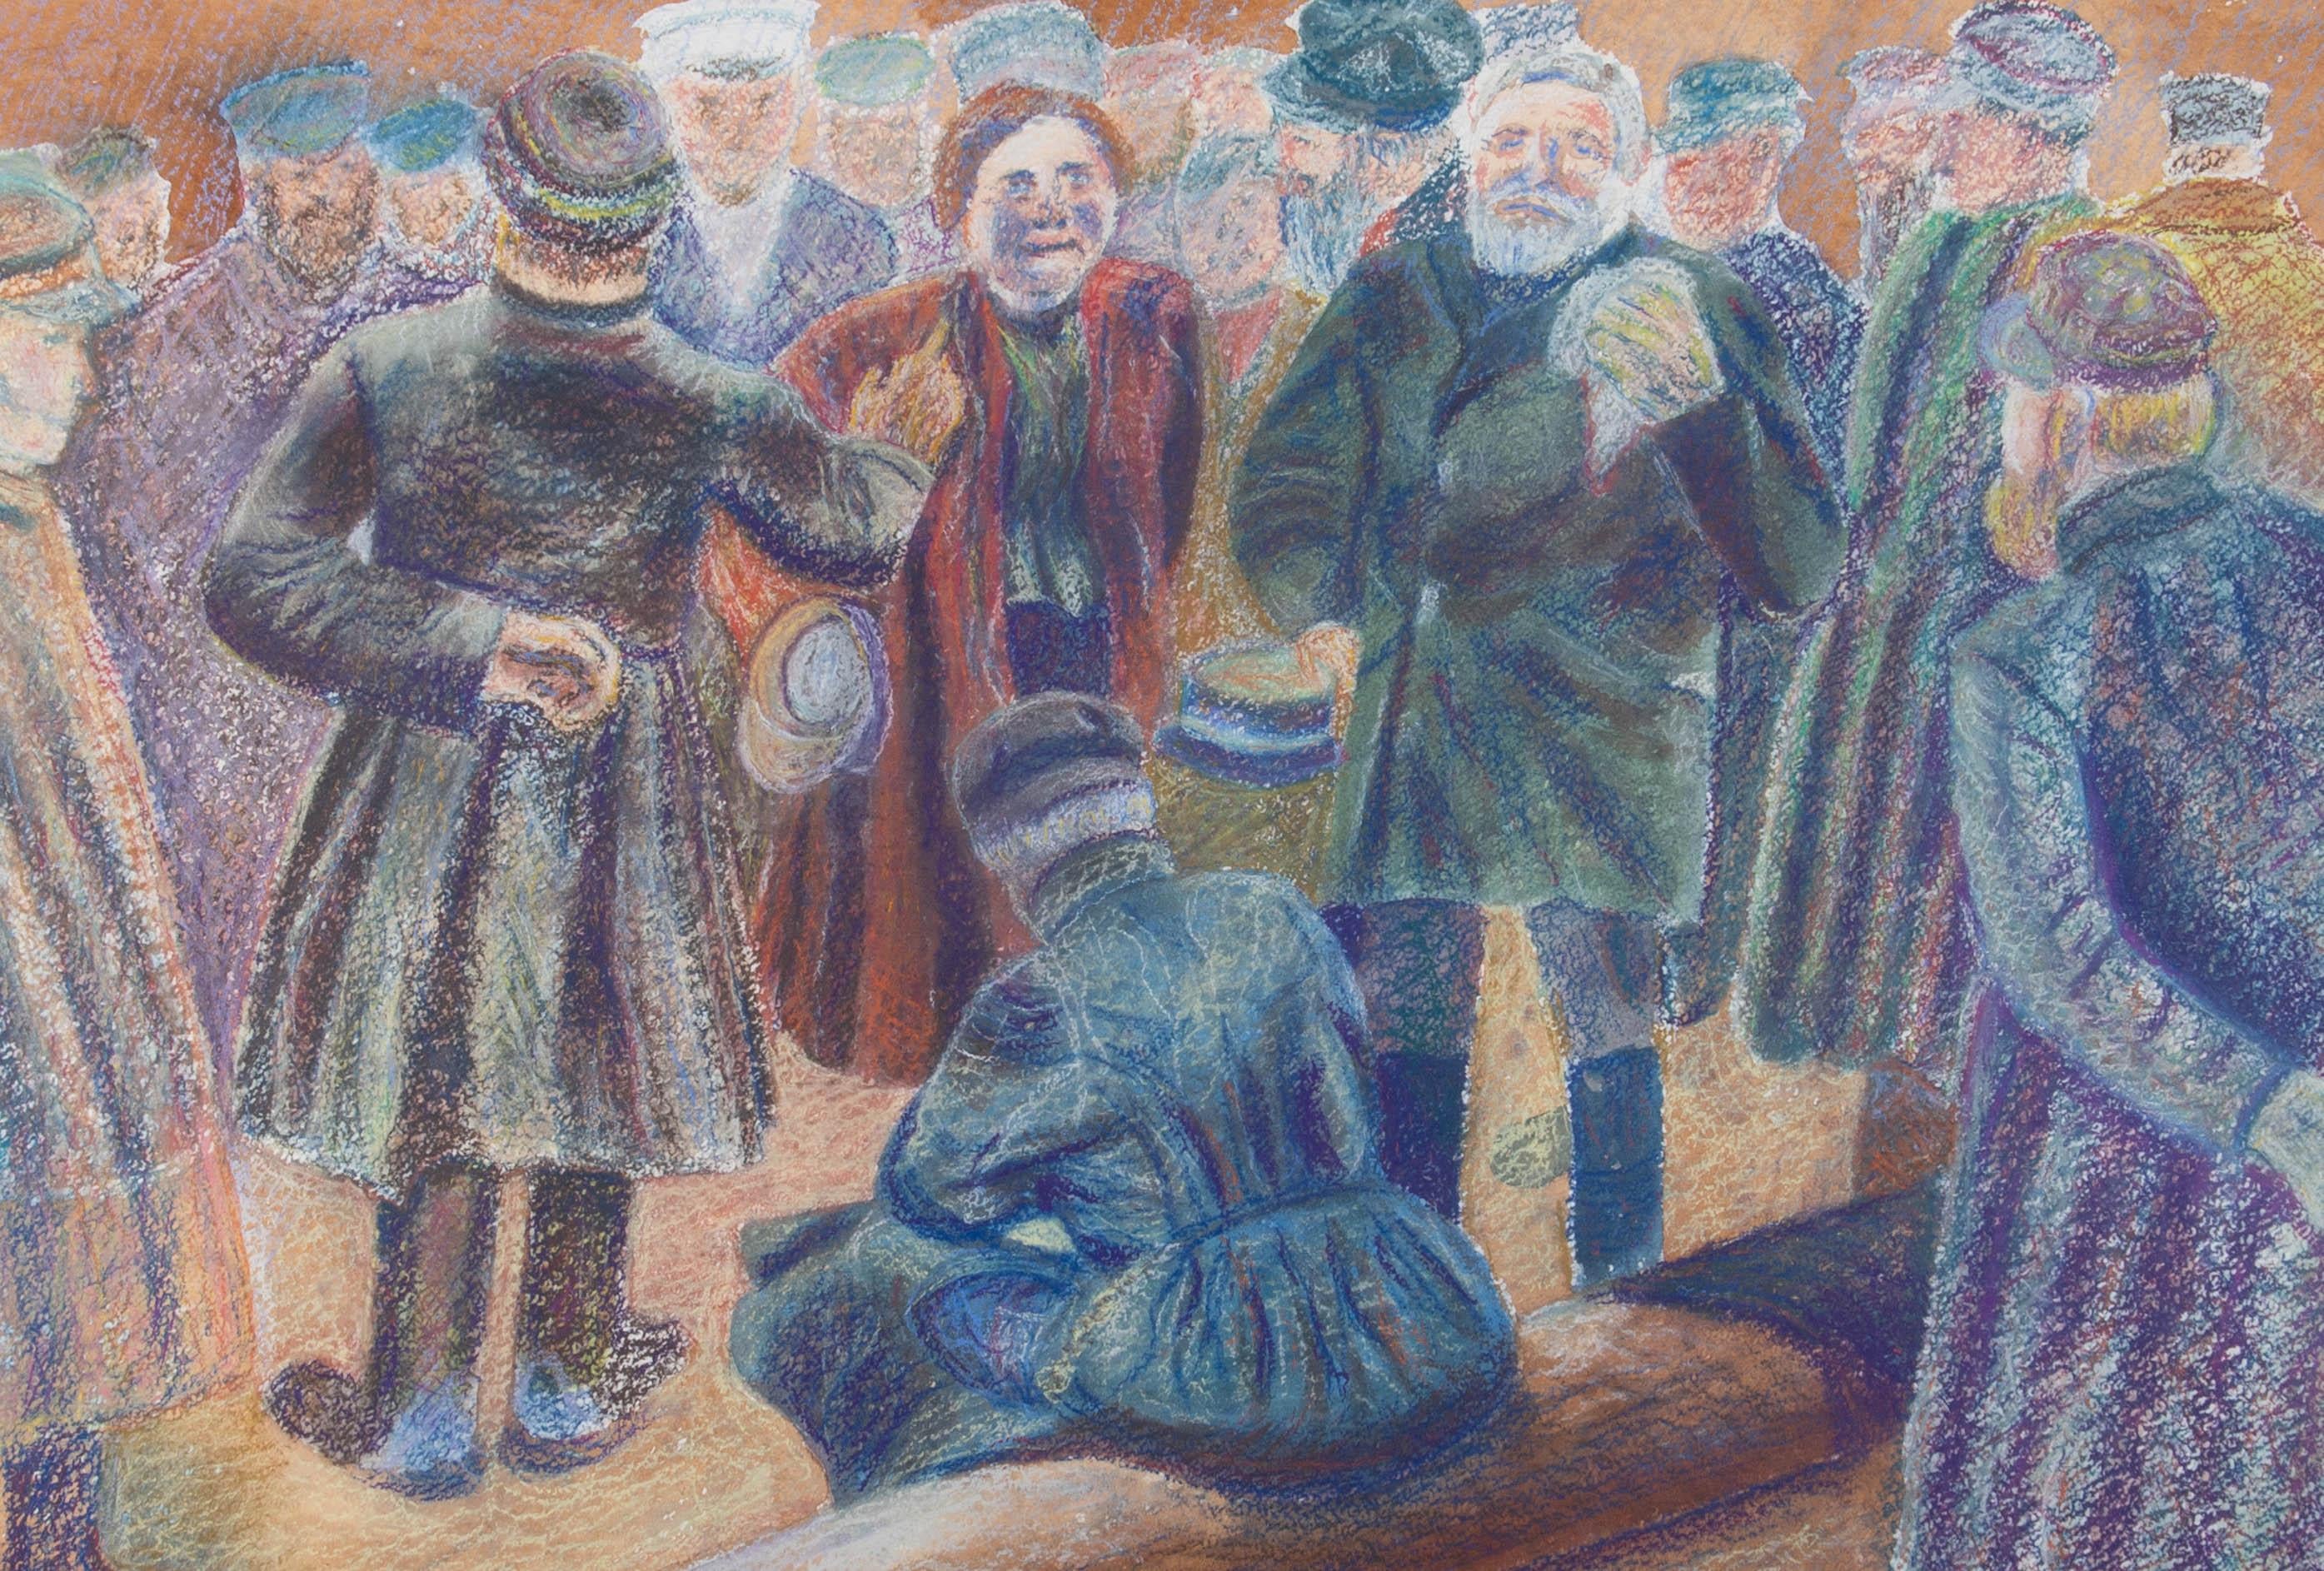 A colourful and accomplished chalk pastel scene depicting a crowd, possibly of Russian figures. A man with his back to the viewer takes charge of the crowd at the left of the composition, while a further figure rests on a log or mast in the